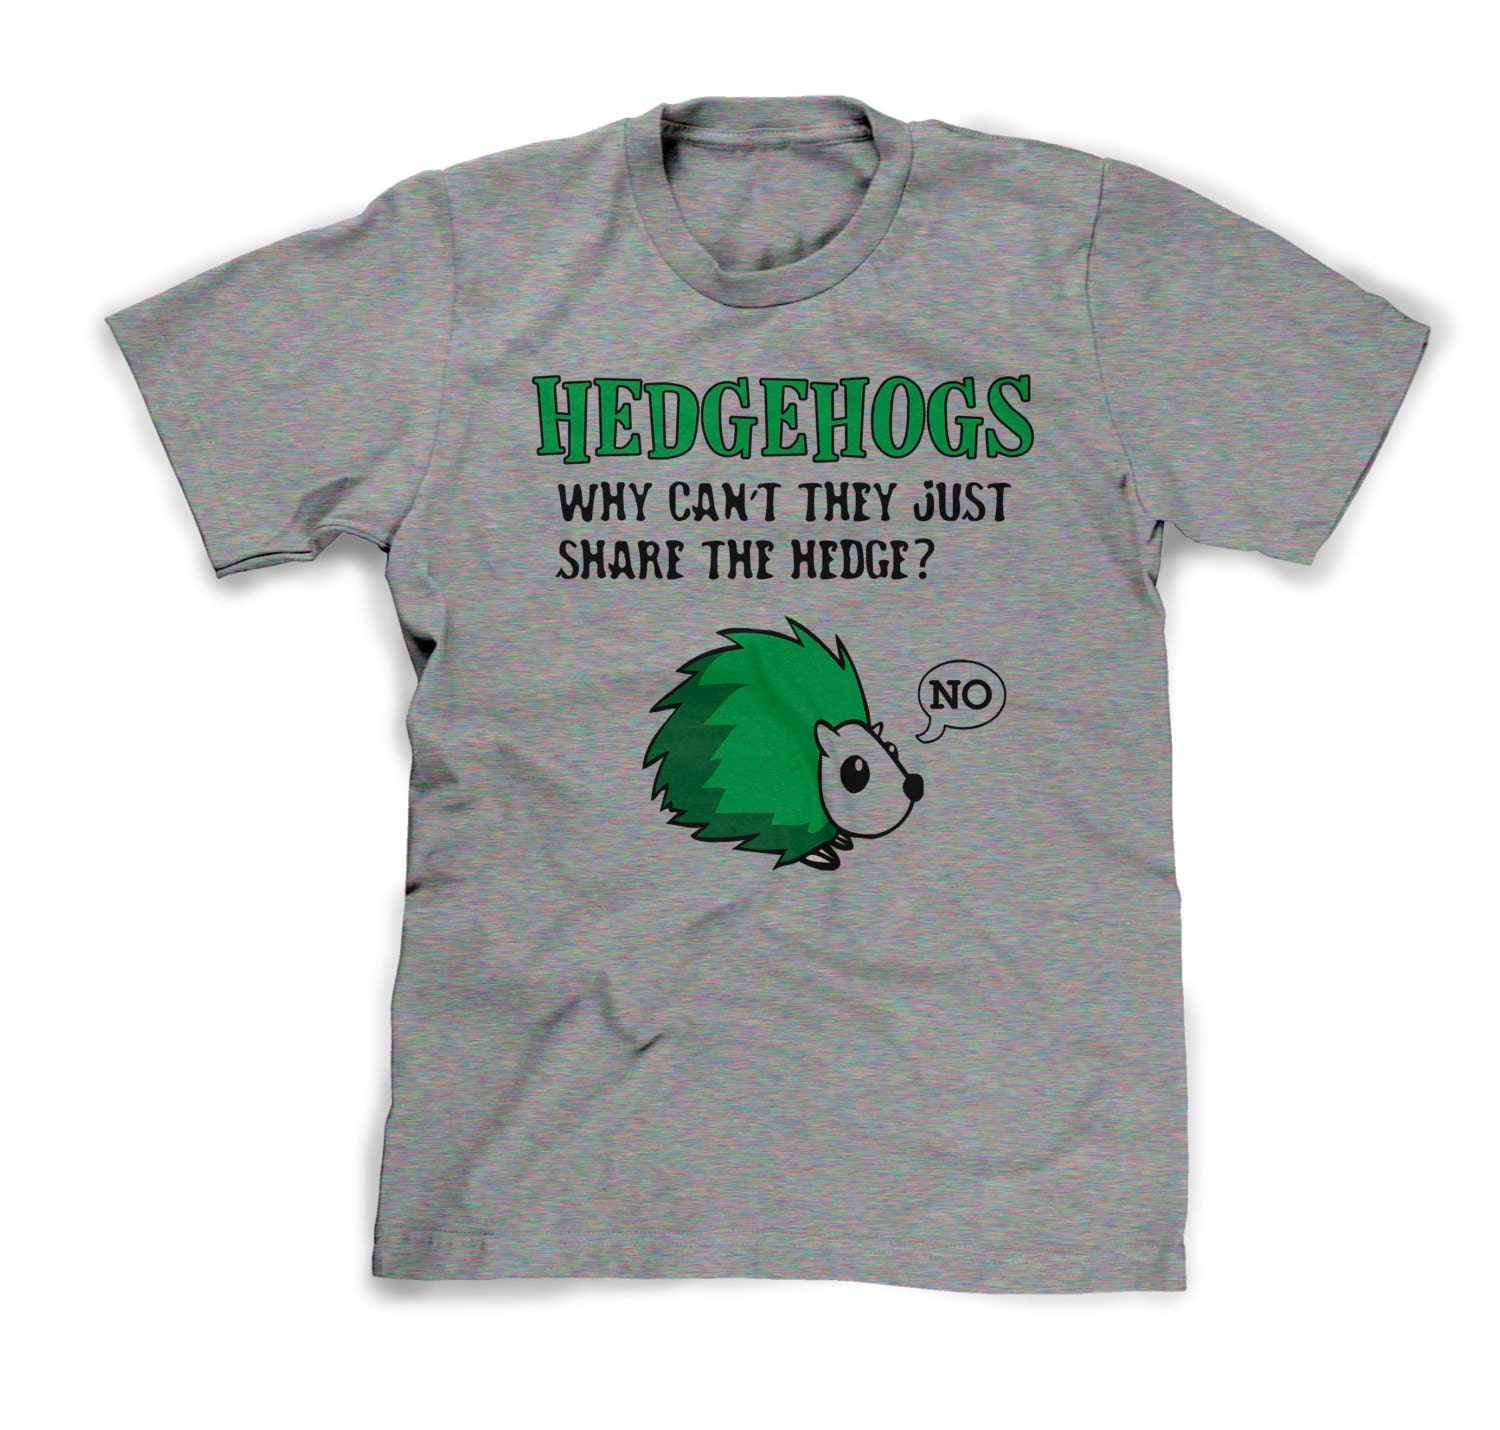 Hedgehog Shirt Funny Tee Hedgehogs Don't Share by FunhouseTshirts